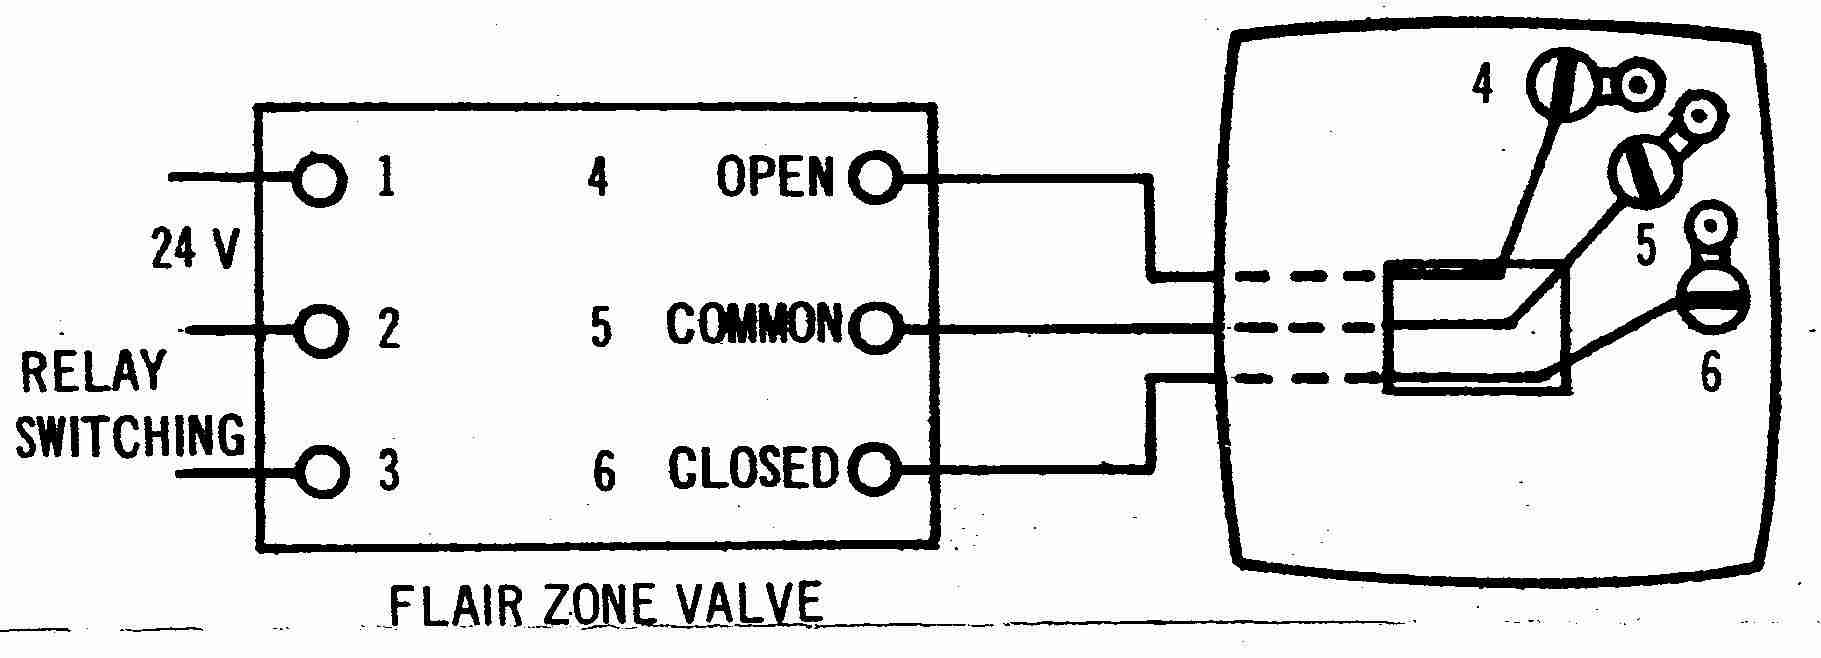 Room Thermostat Wiring Diagrams For Hvac Systems - 4 Wire Thermostat Wiring Diagram